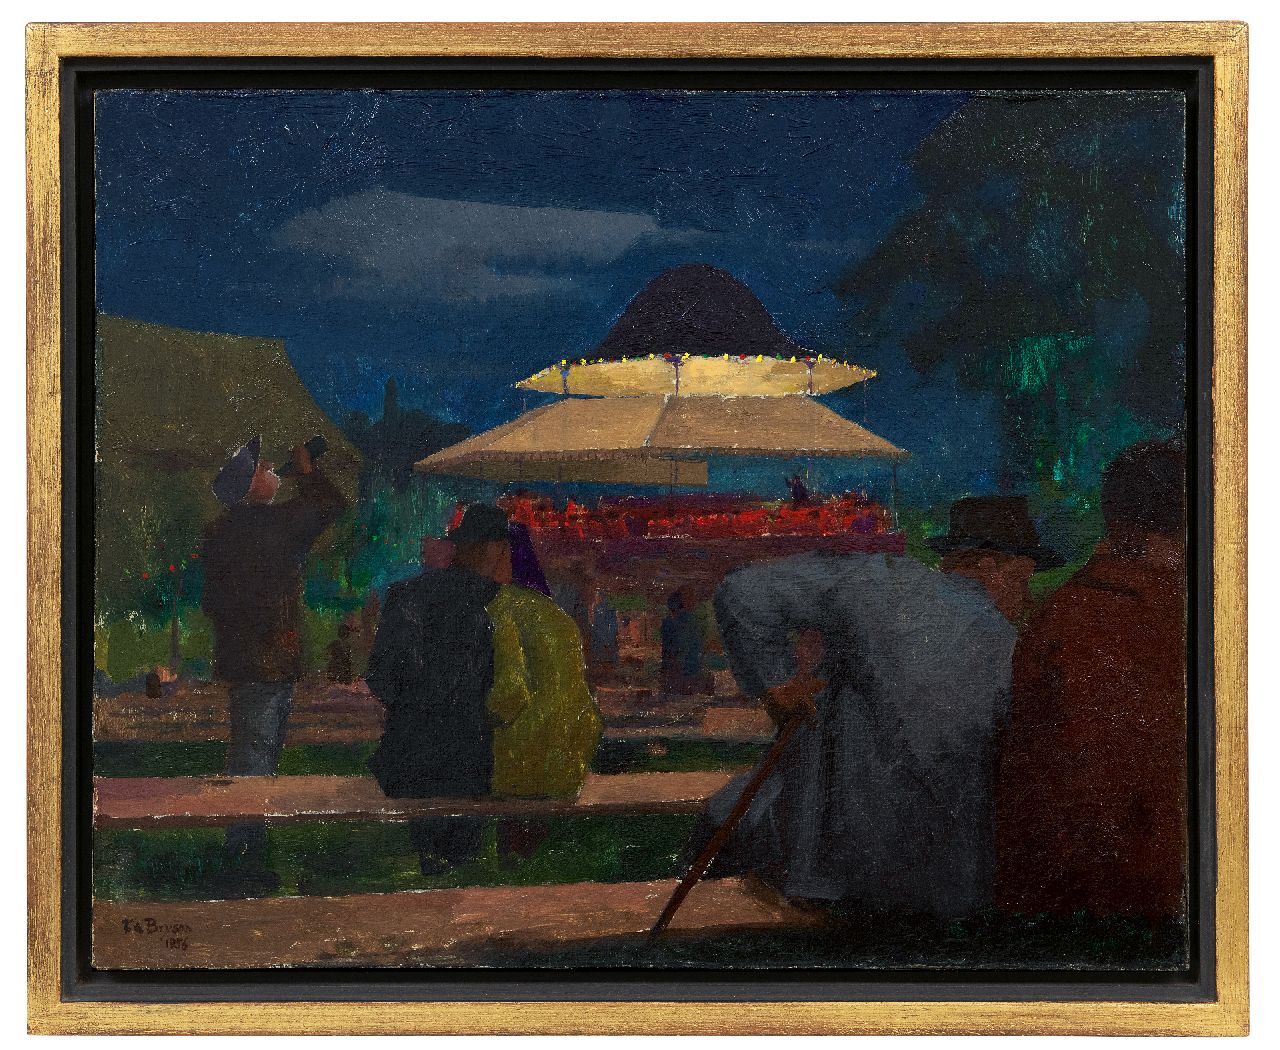 Bryson F.W.  | Bryson | Paintings offered for sale | Outdoor concert at night, oil on canvas 40.5 x 50.8 cm, signed l.l. and dated 1956